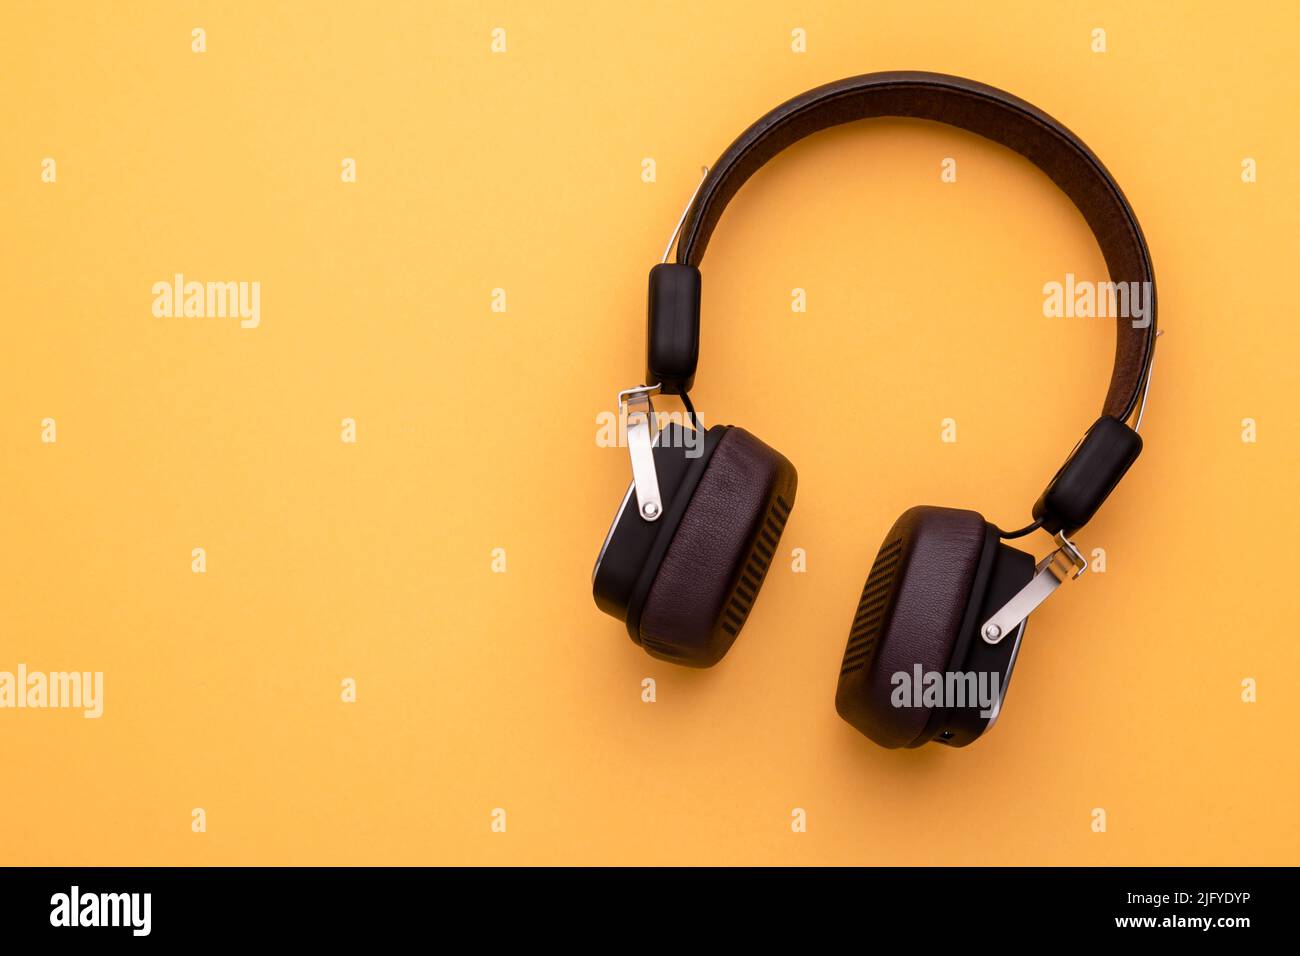 Top view black Headphone or Headset on bright color background. Copy space for text or design Stock Photo